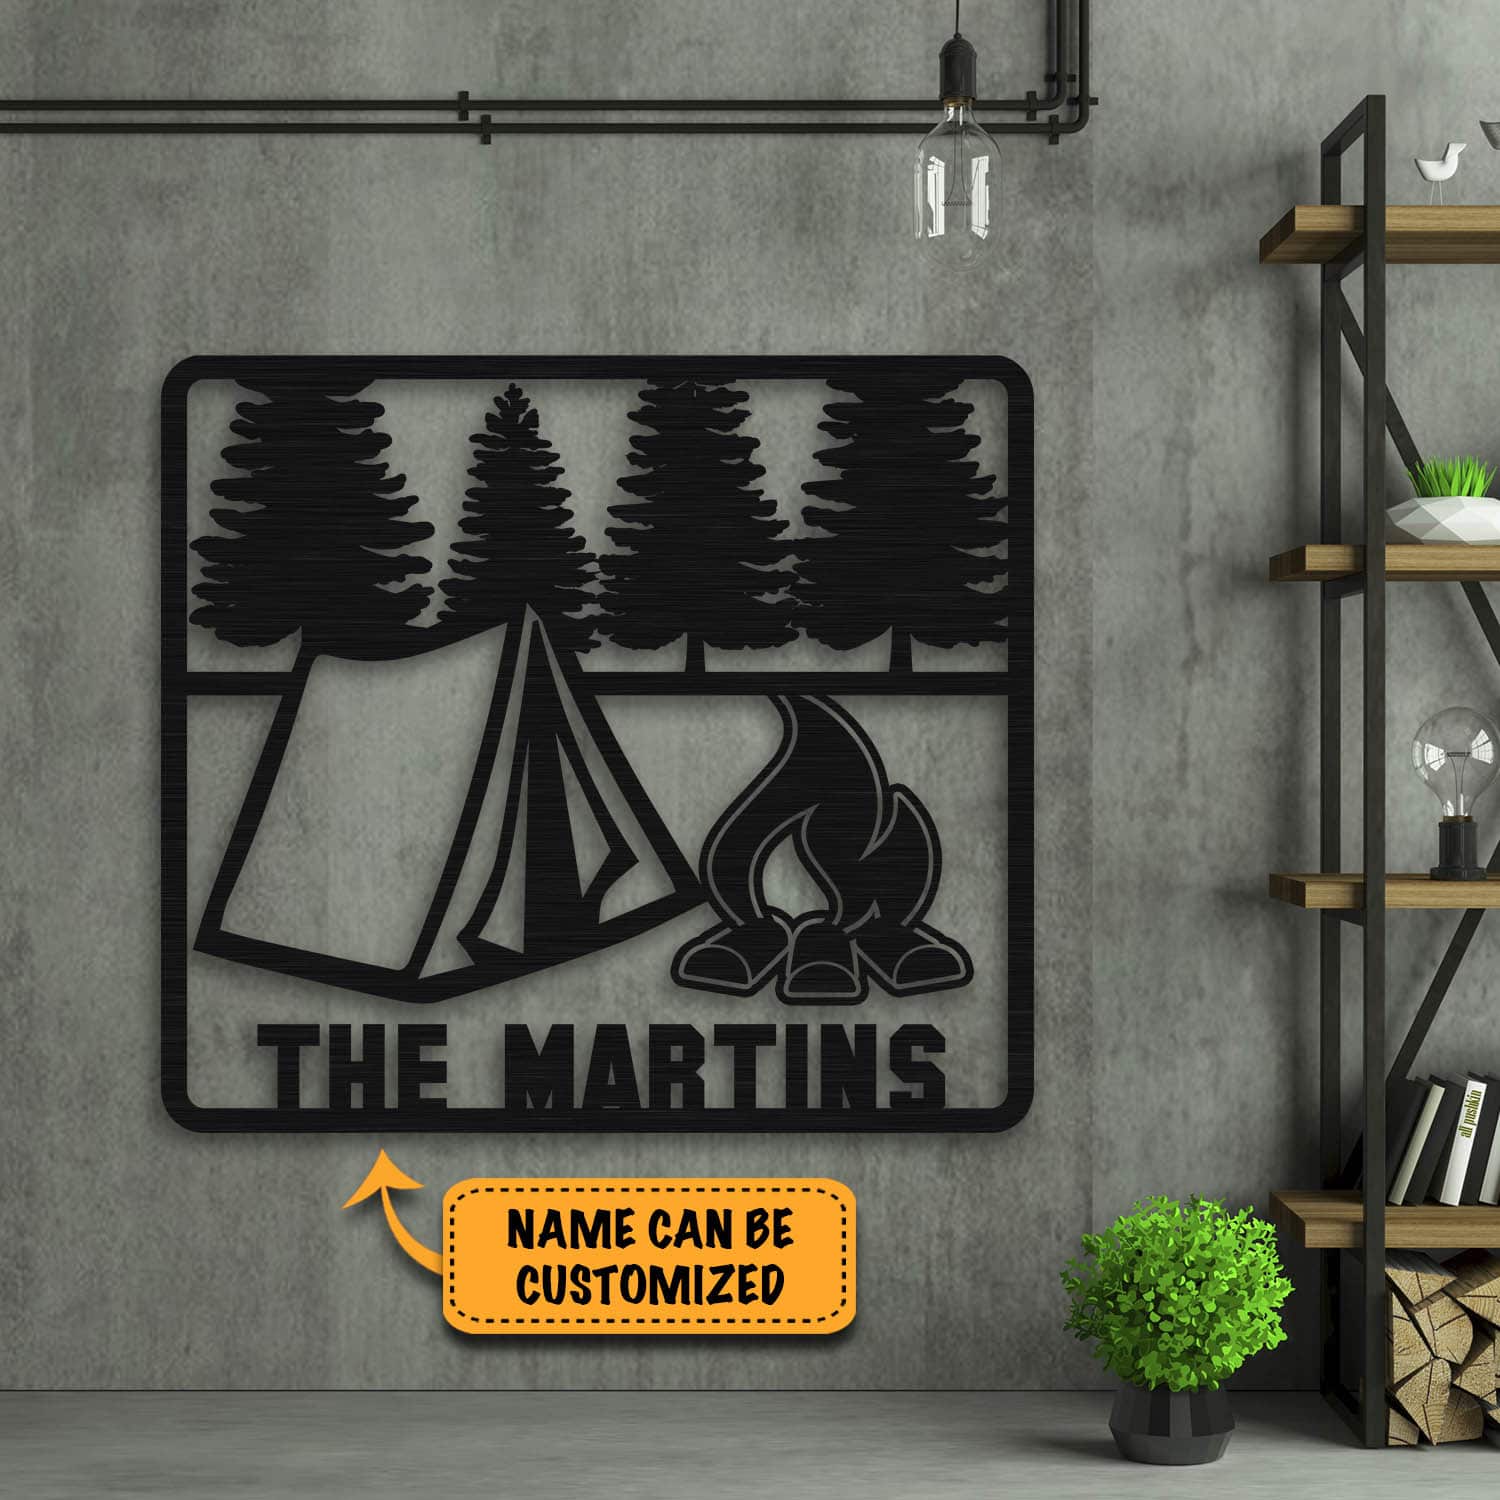 Camping Personalized Signs Campfire Camping Decor Vintage Decorative Metal Sign – Indoor Outdoor Decor